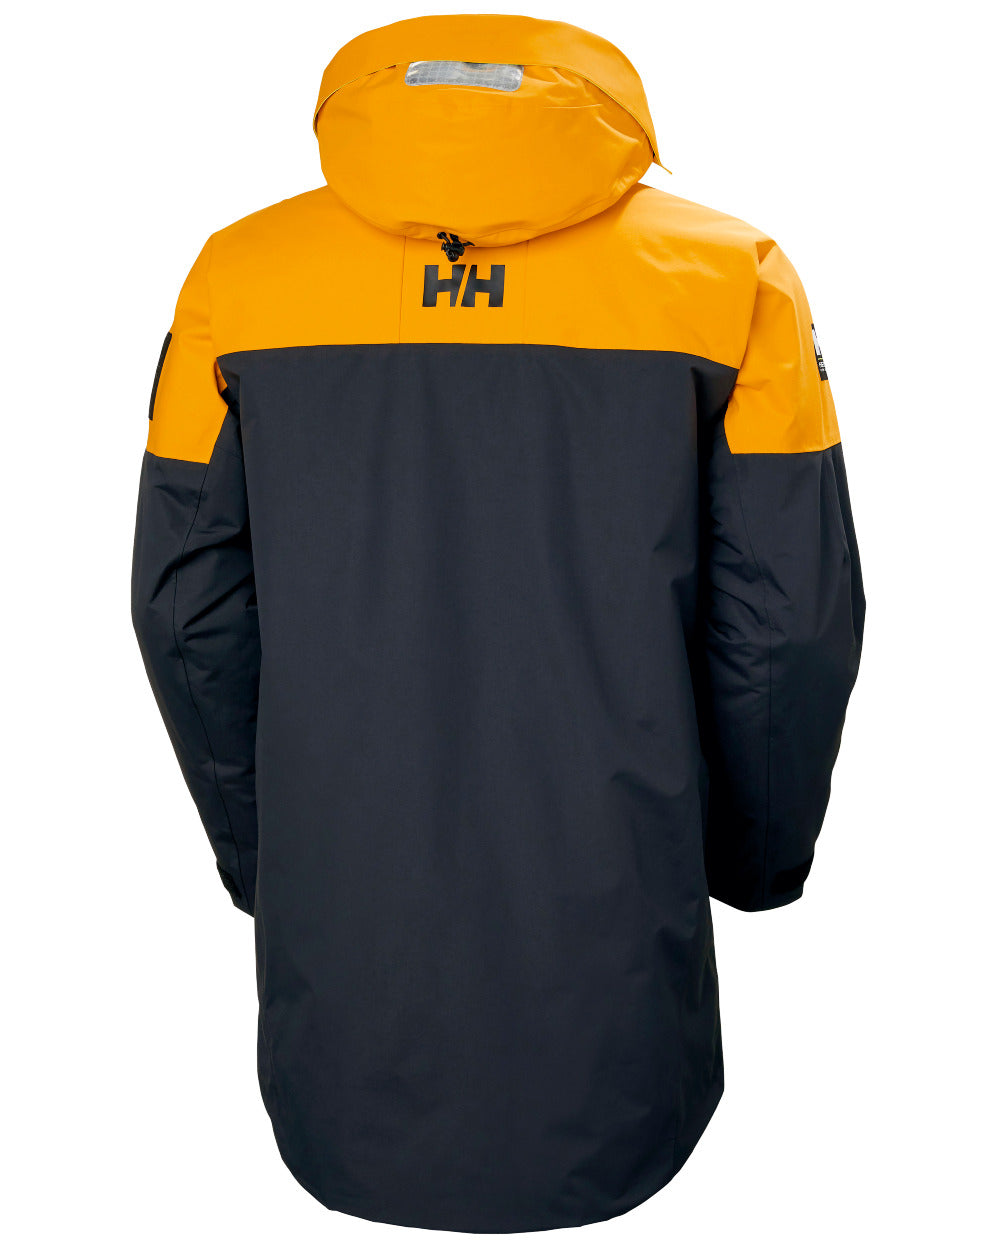 Cloudberry Coloured Helly Hansen Mens Arctic Ocean H2FLOW Parka On A White Background 